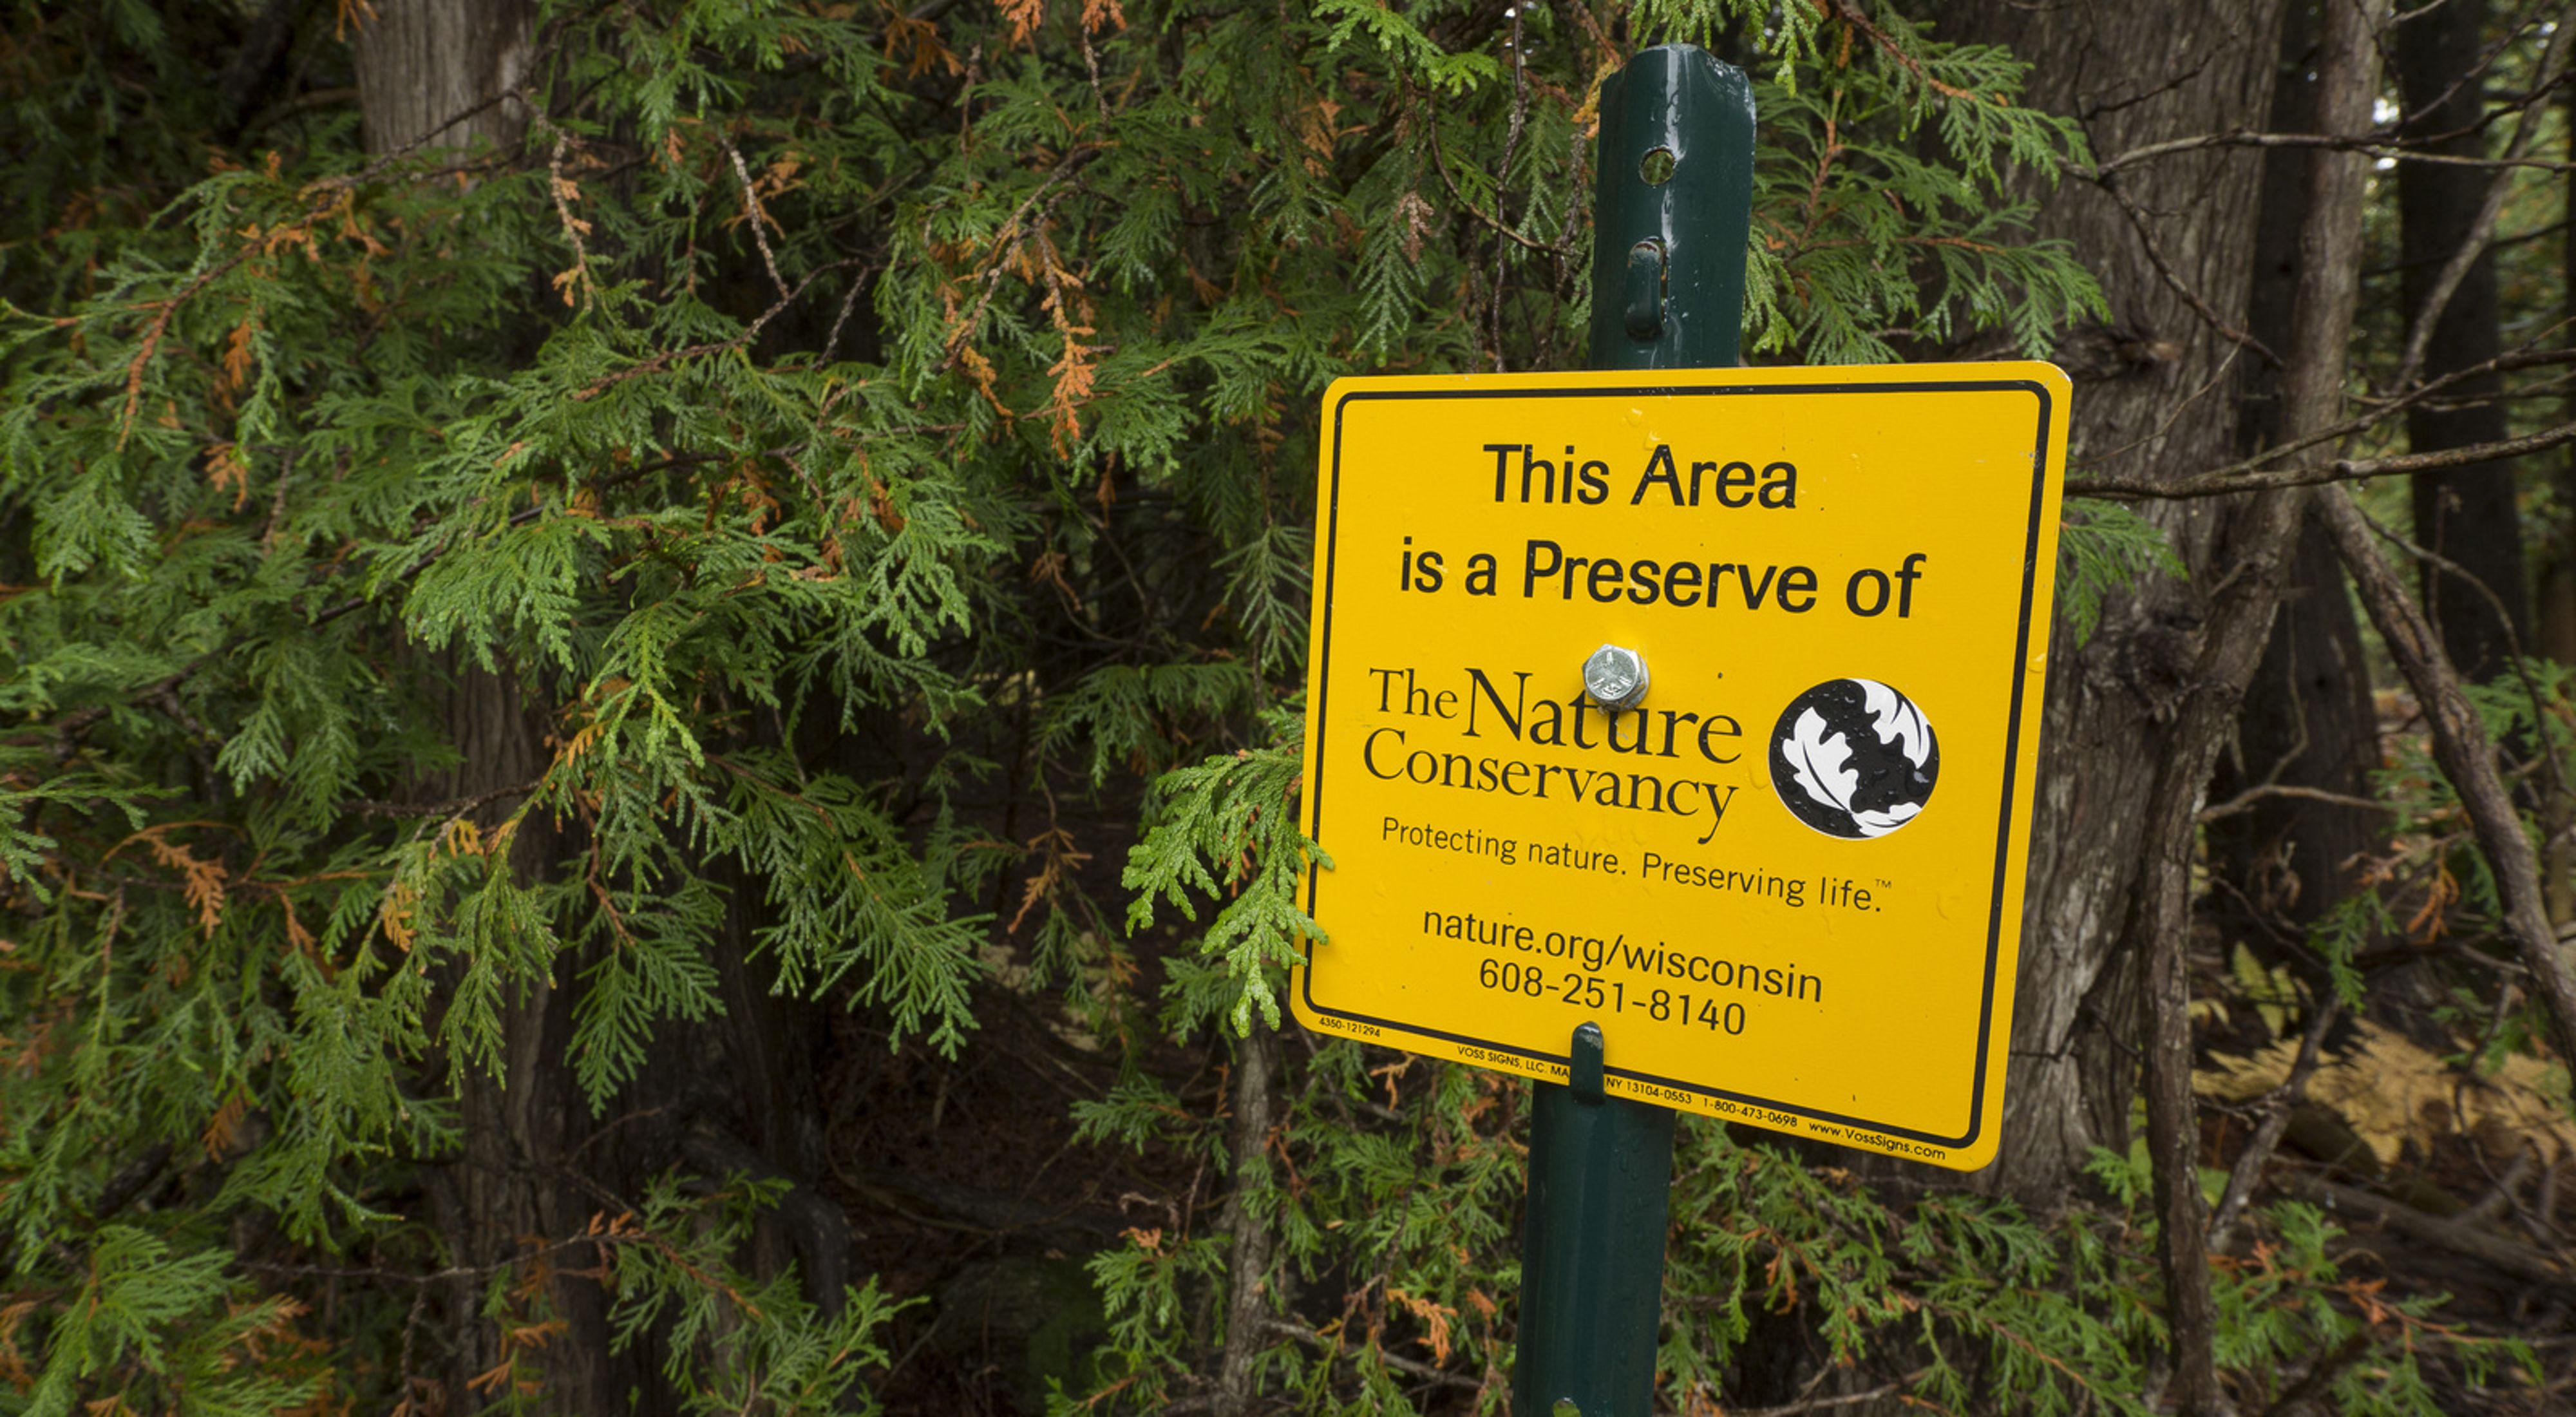 A sign that says this area is a preserve of The Nature Conservancy. Protecting nature. Preserving life. It also includes a vanity URL and a phone number.